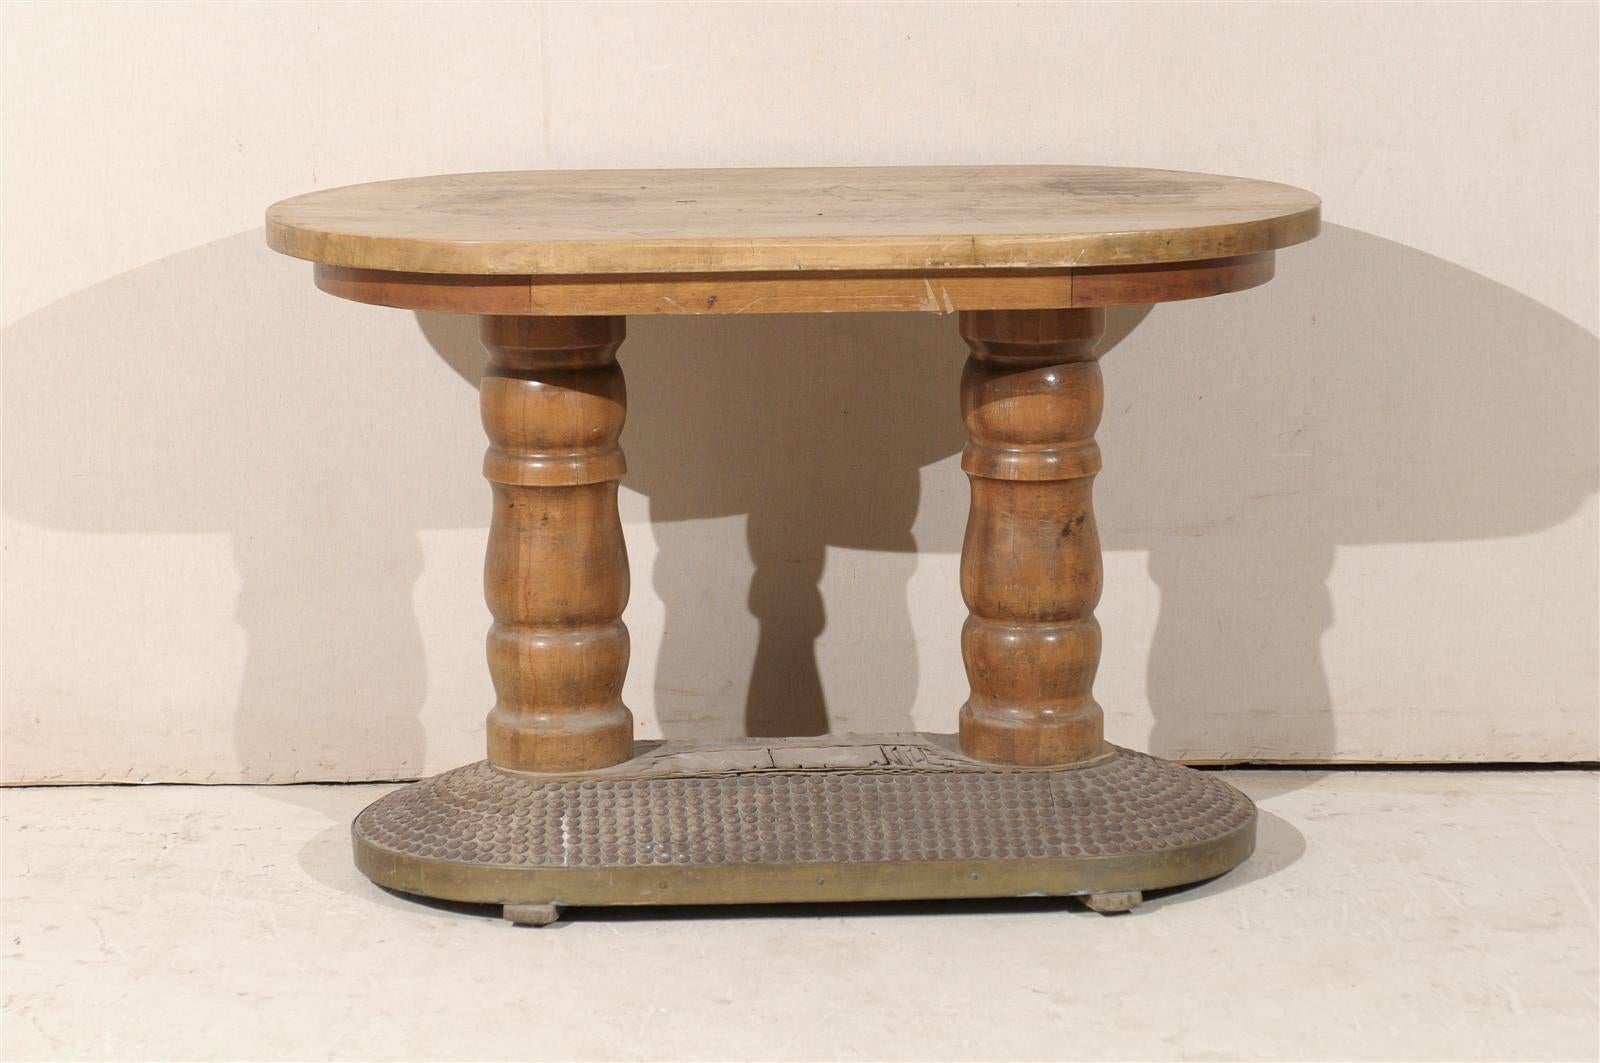 A French early 20th century oval wooden console table with turned legs and interesting wooden base decorated with thick nail heads.